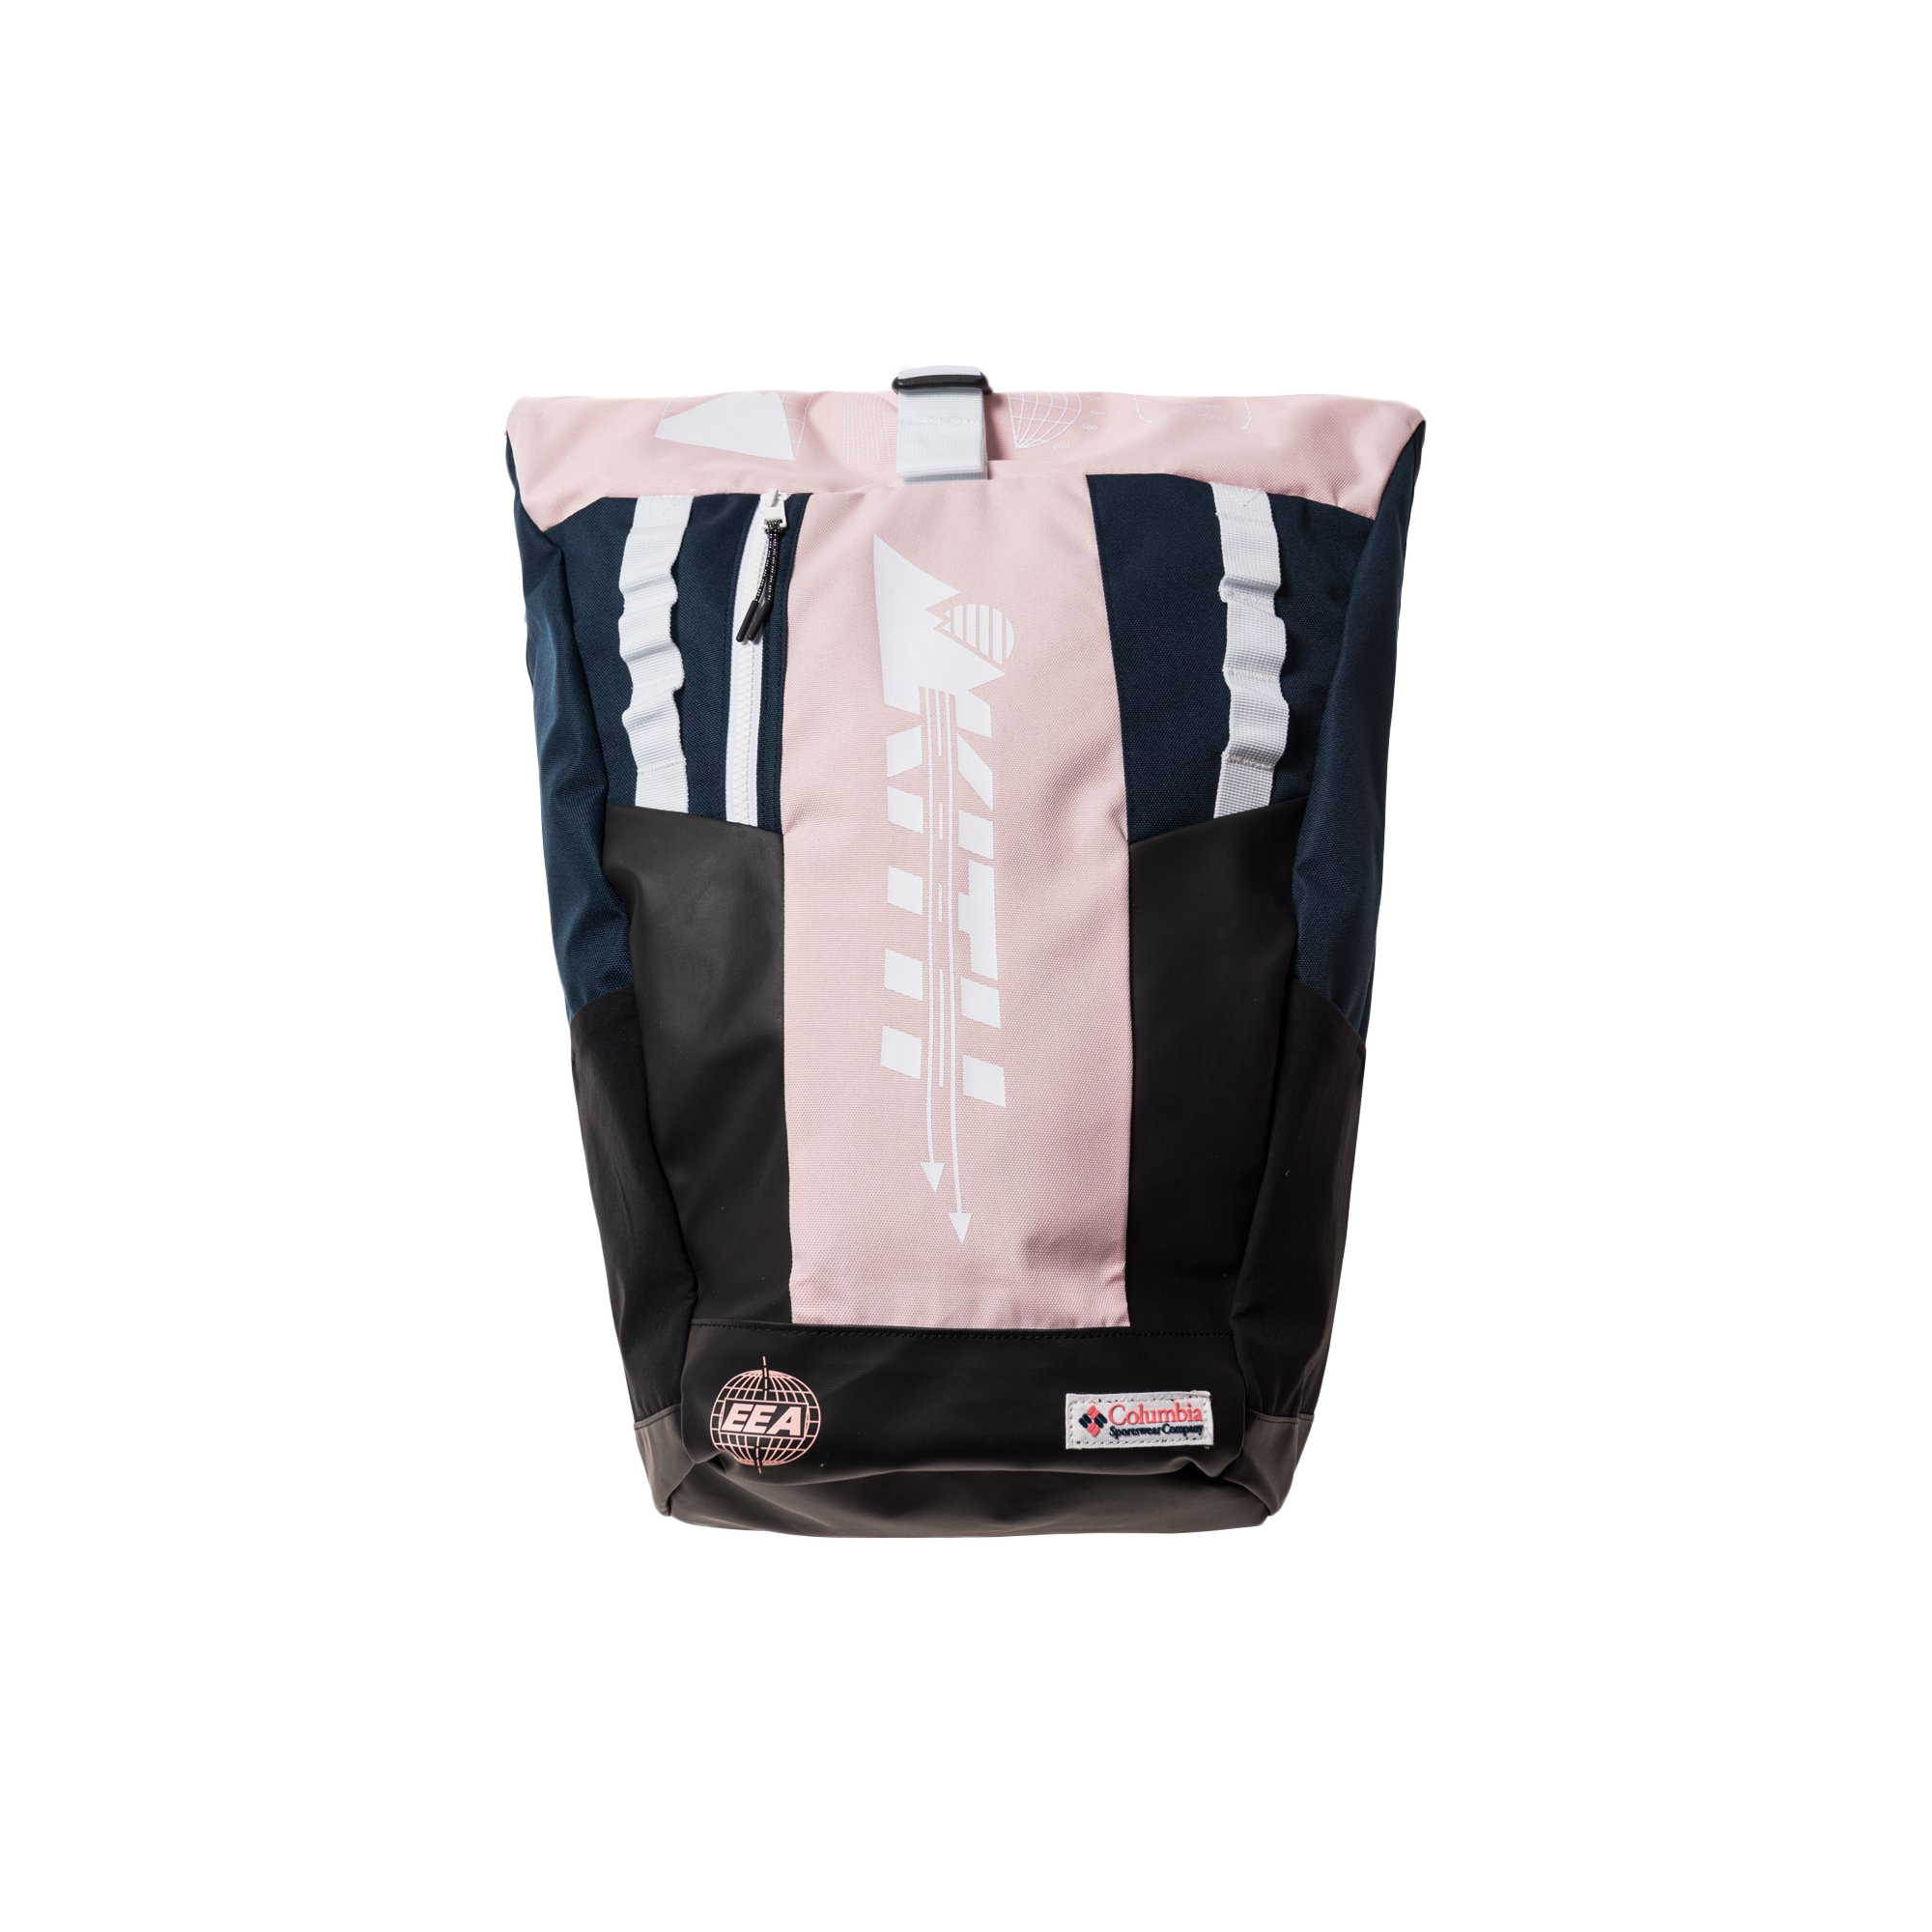 Kith x Columbia Rolltop Bag Vintage Pink - SS18 - US